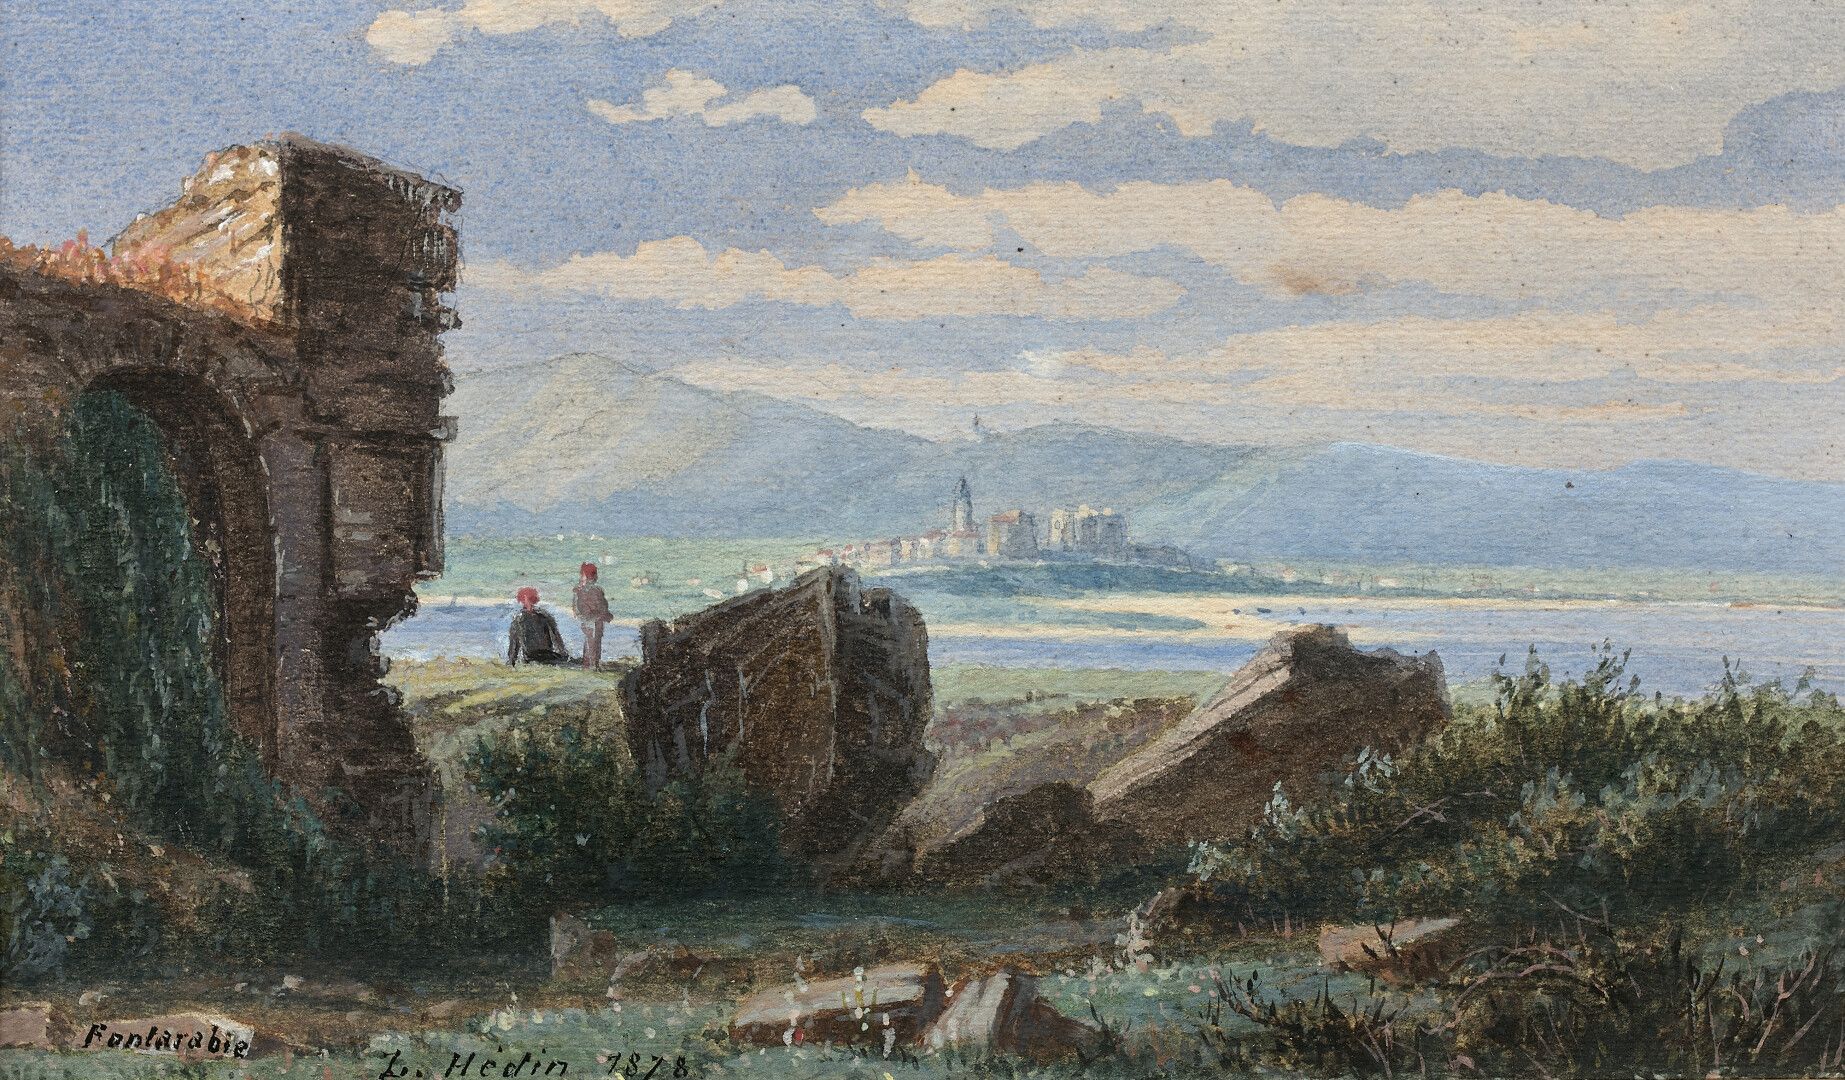 Null Louis HEDIN (1818-1886)

Fontarrabia, seen from the fort of Hendaye, 1878

&hellip;